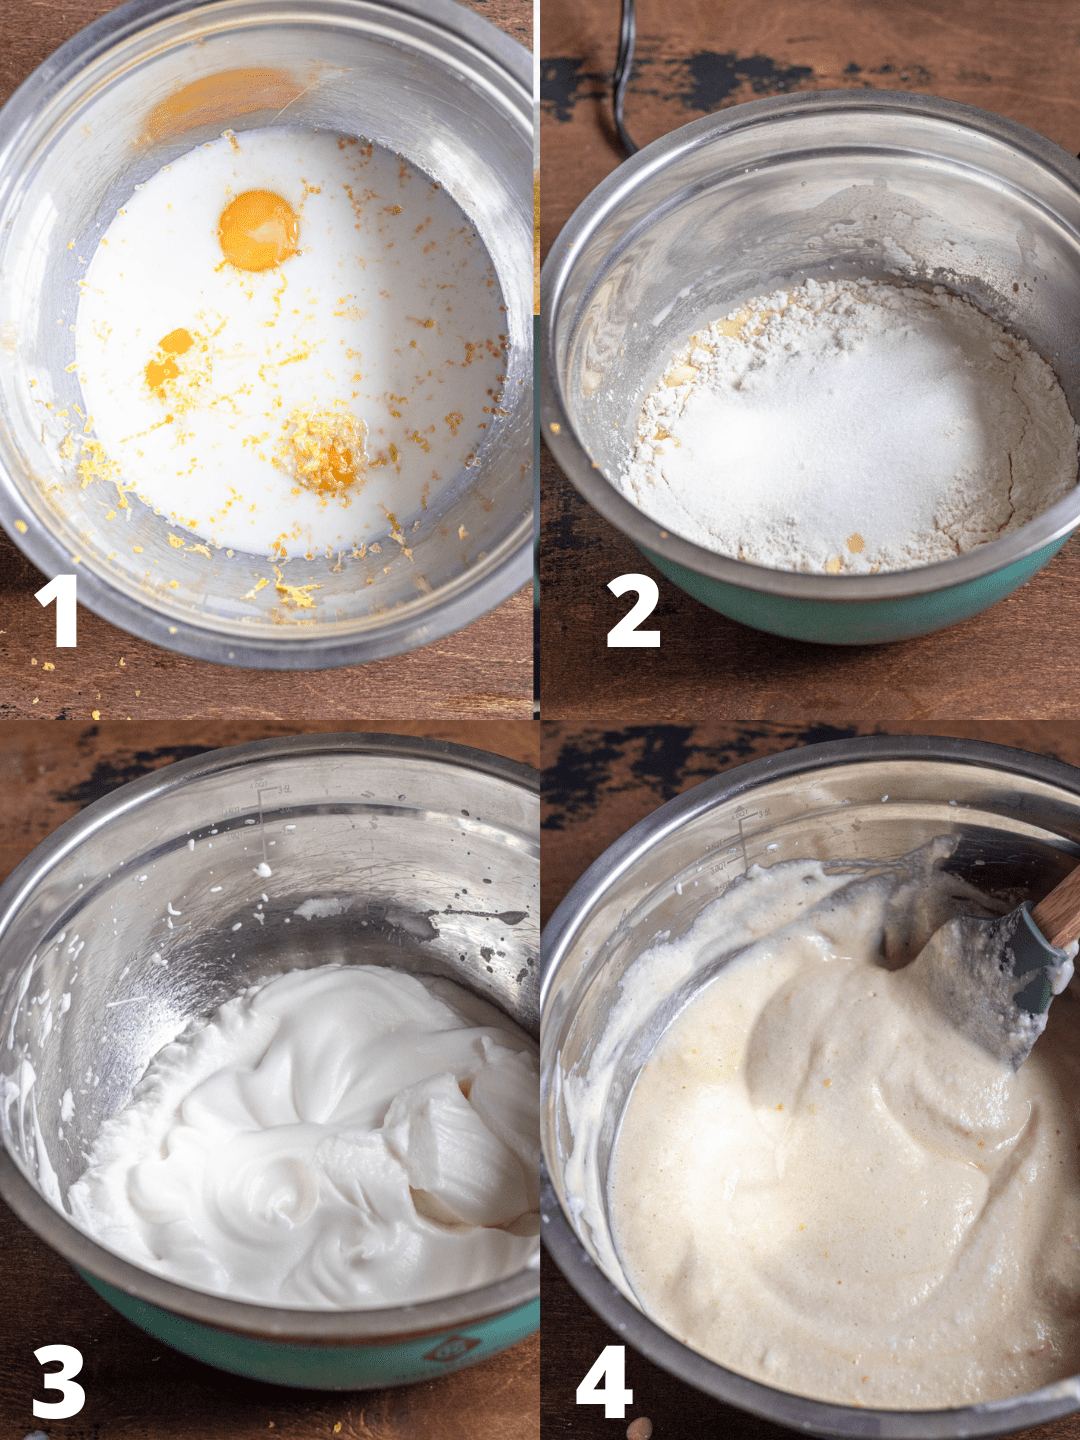 Collage of photos showing how to prepare the batter for Kaiserschmarrn. Eggs, milk and lemon zest being combined, then adding flour and sugar to make Kaiserschmarrn. Egg whites being beaten, finally all ingredients combined to make batter. 